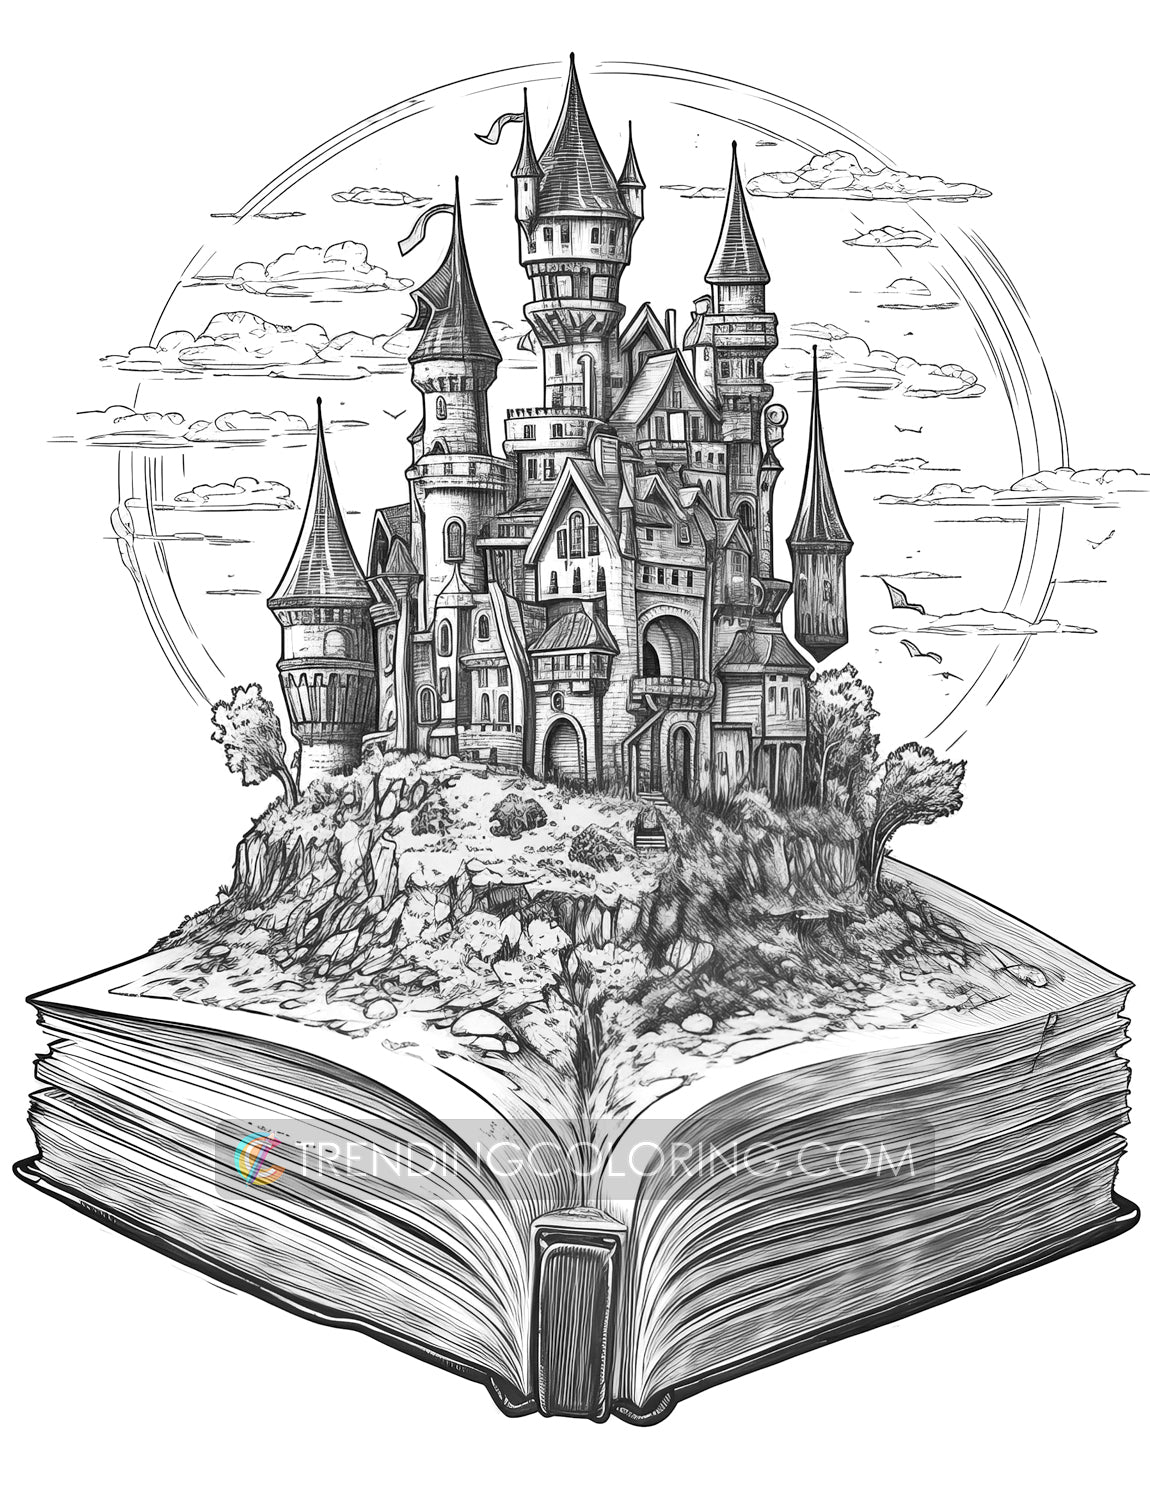 25 Open Magic Book Grayscale Coloring Pages - Instant Download - Printable Dark/Light